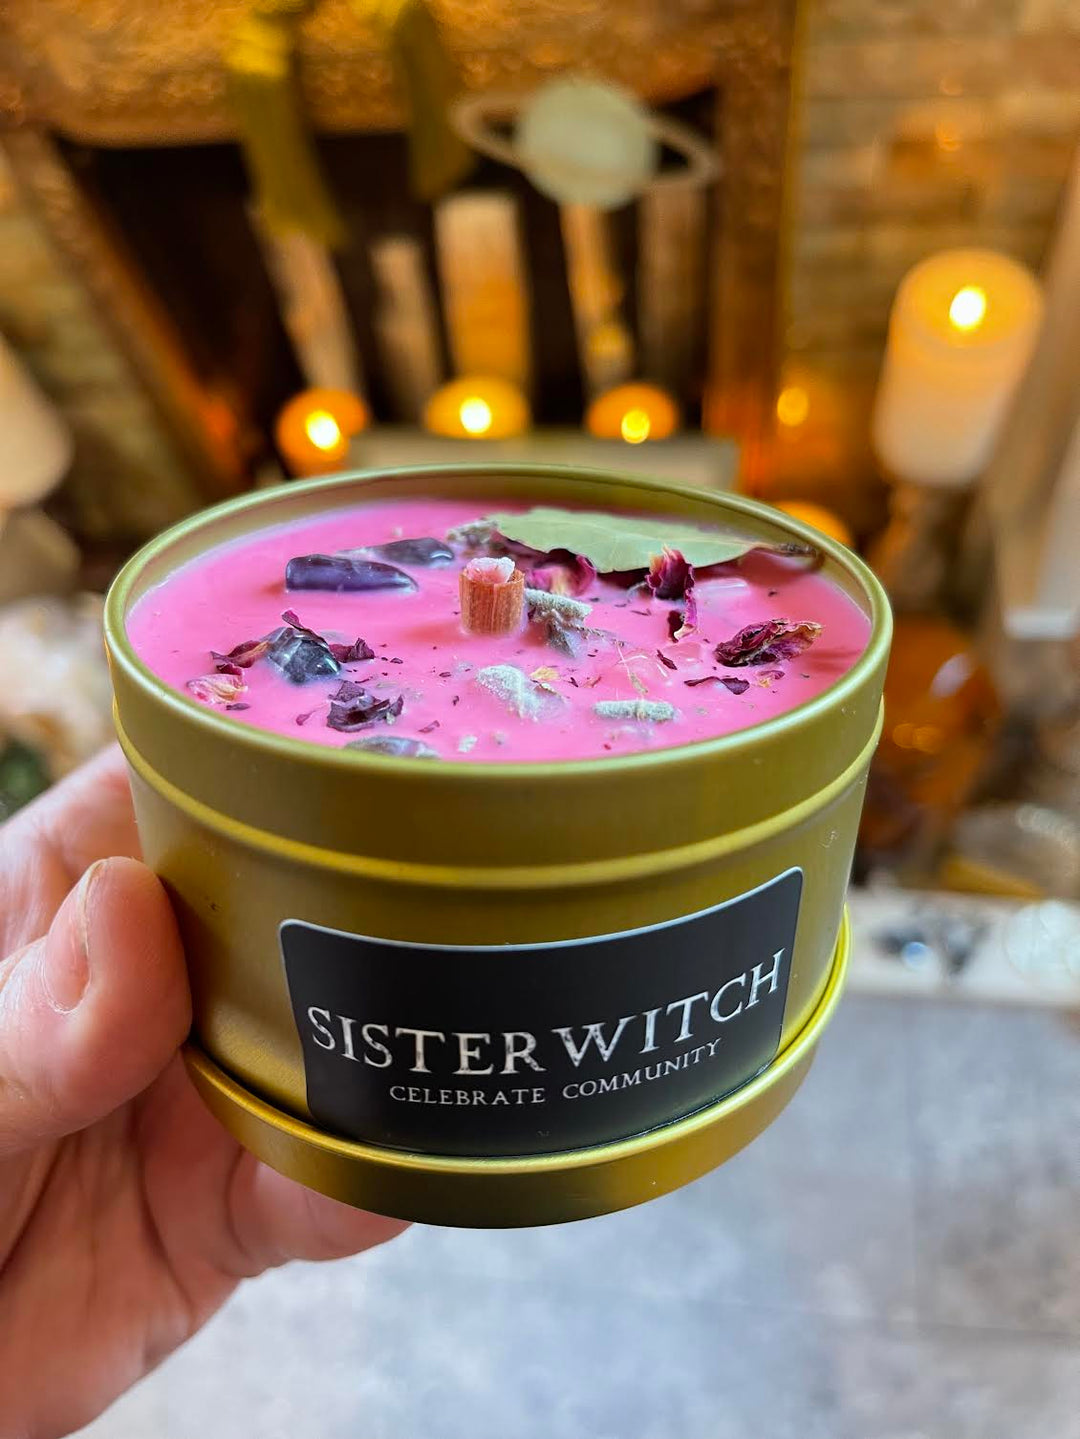 This is the front of the Sisterwitch candle